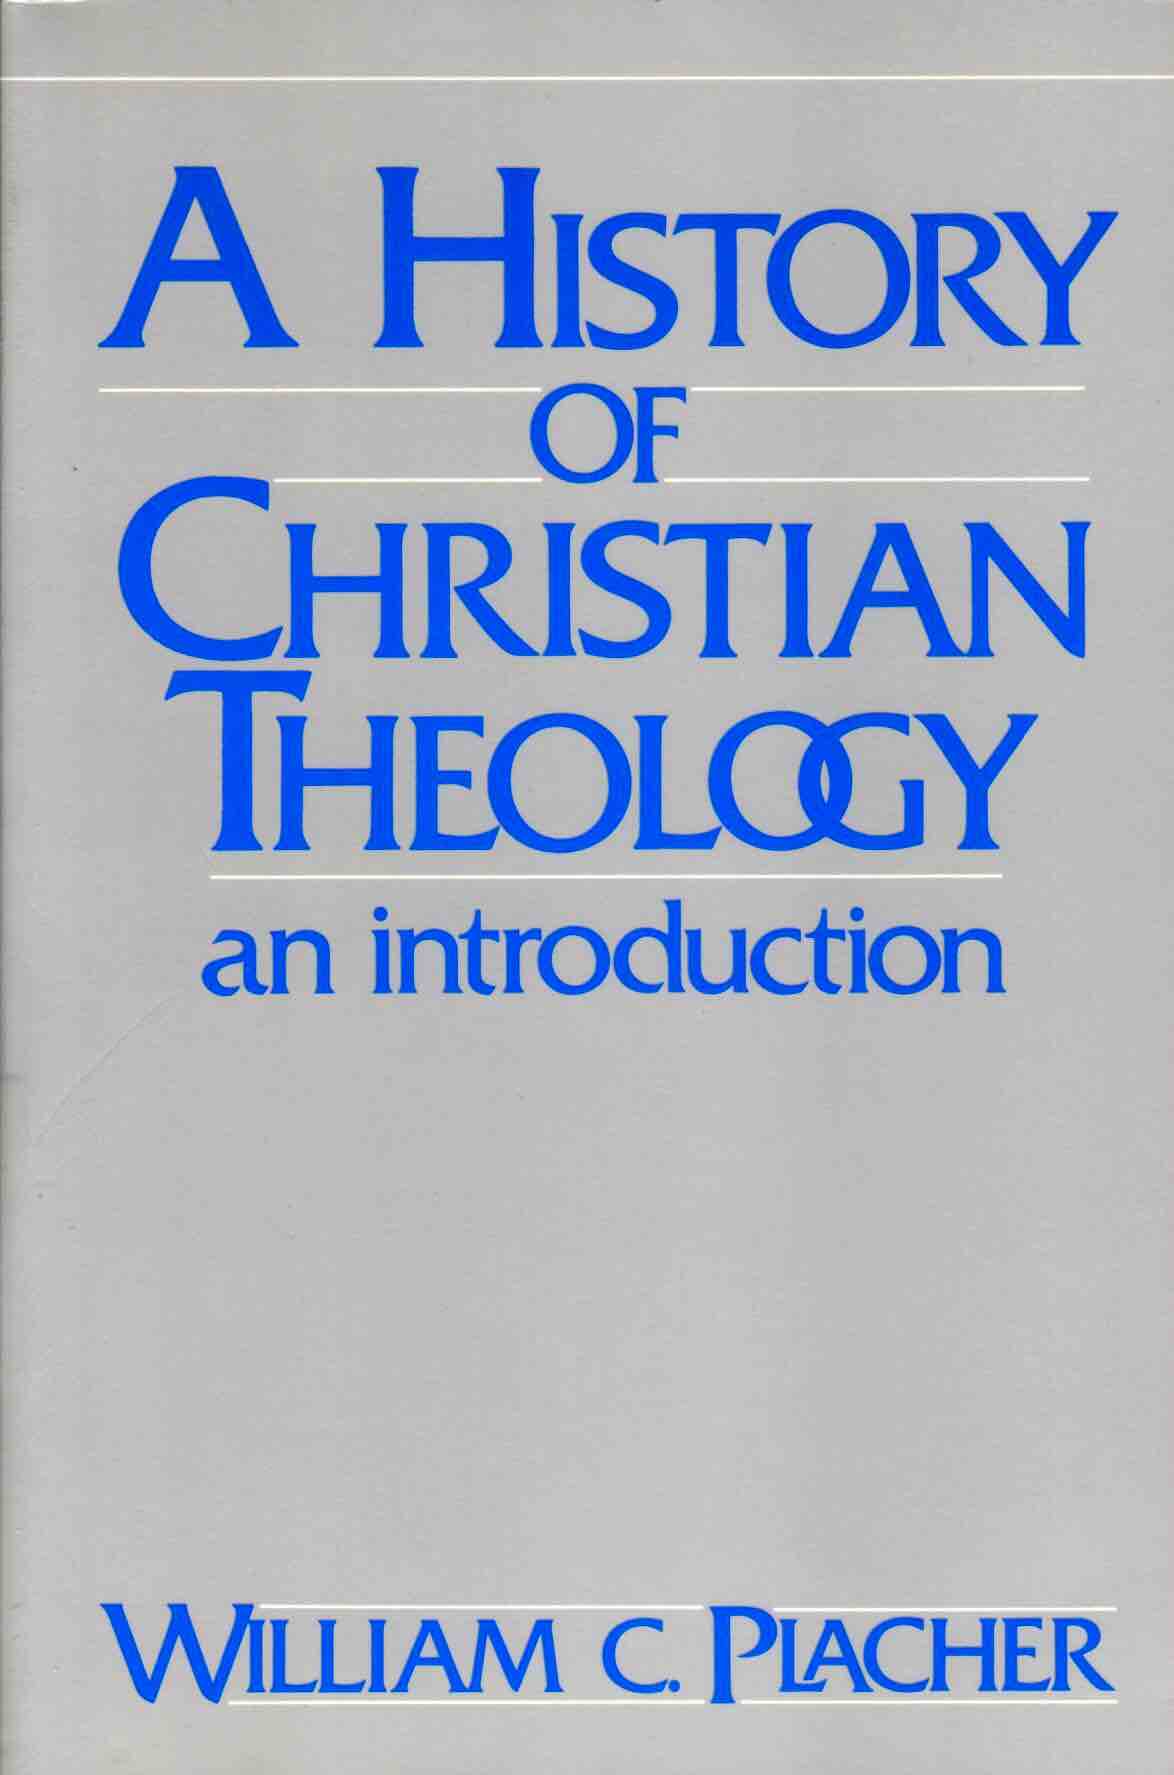 Cover of A History of Christian Theology